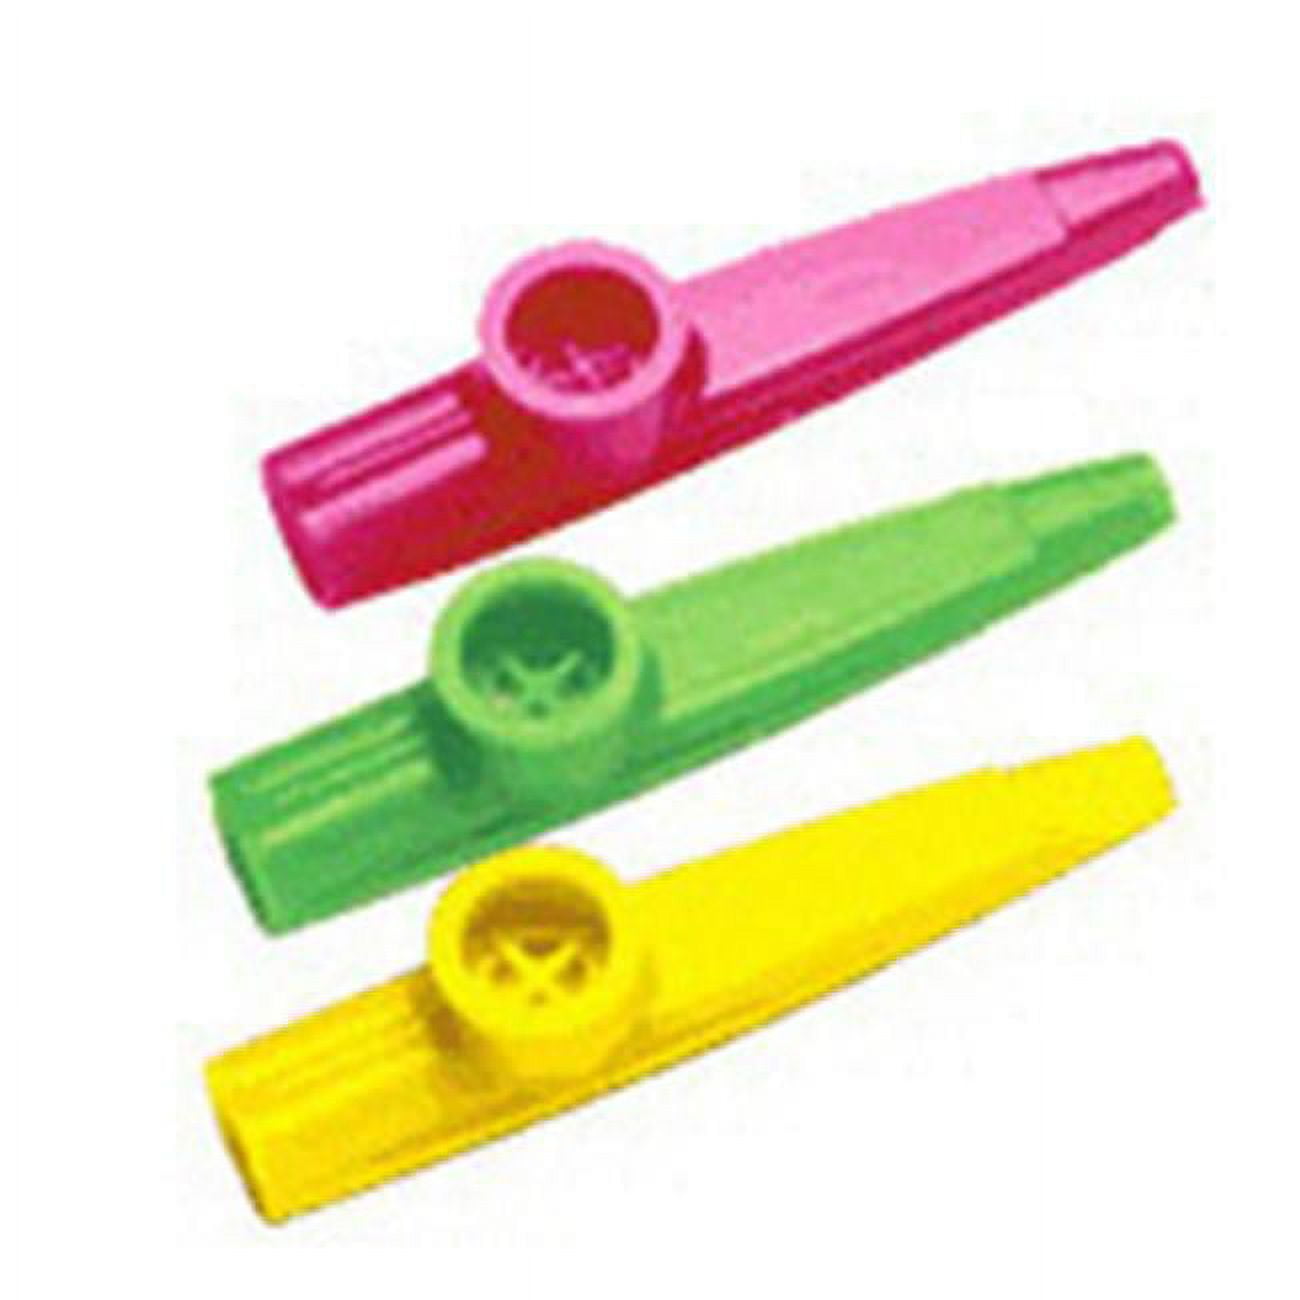 SDJMa Different Colors Kazoo Musical Instruments Aluminum Alloy